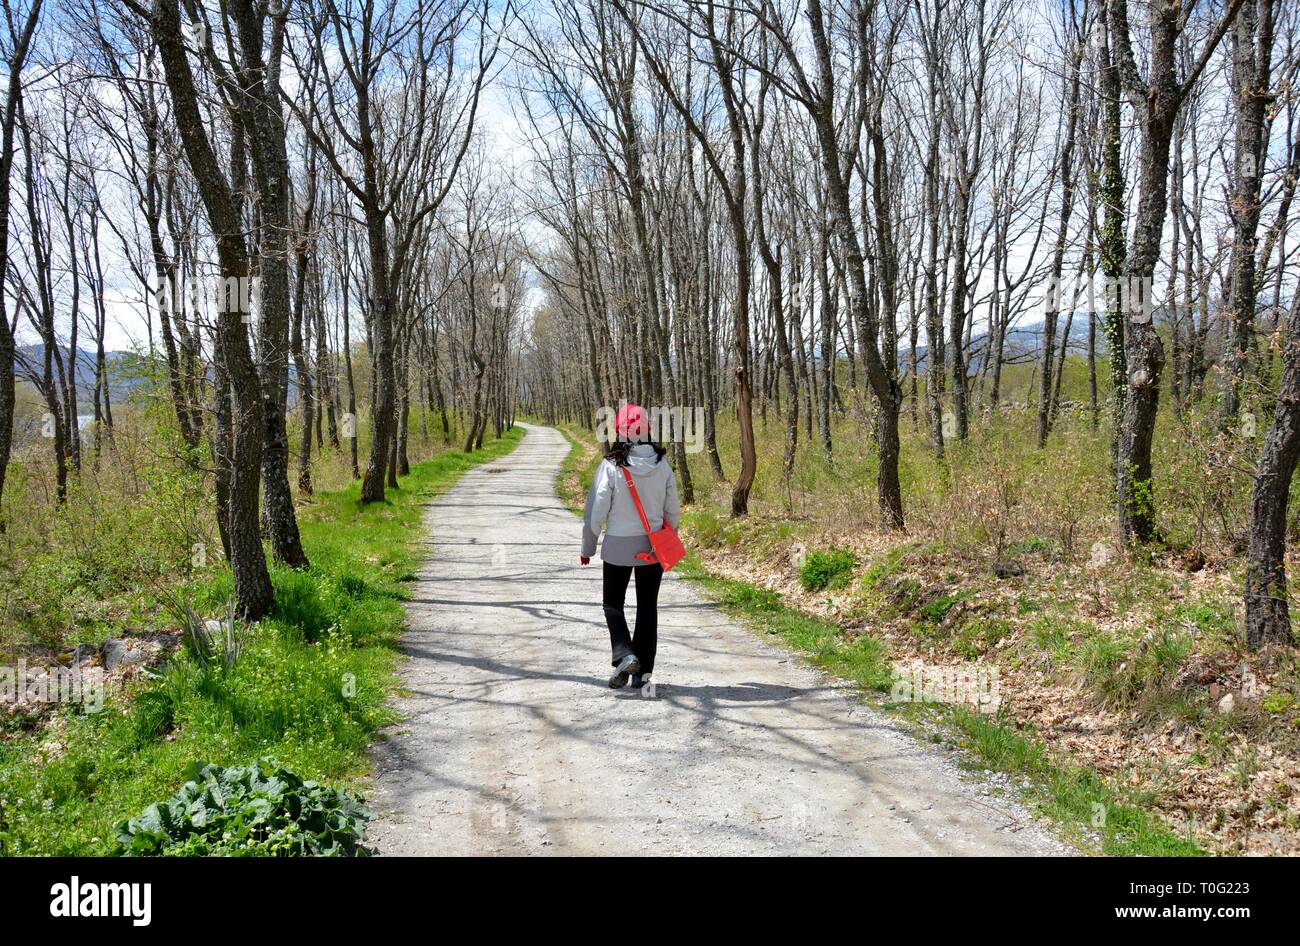 one person walking alone in the forest Stock Photo